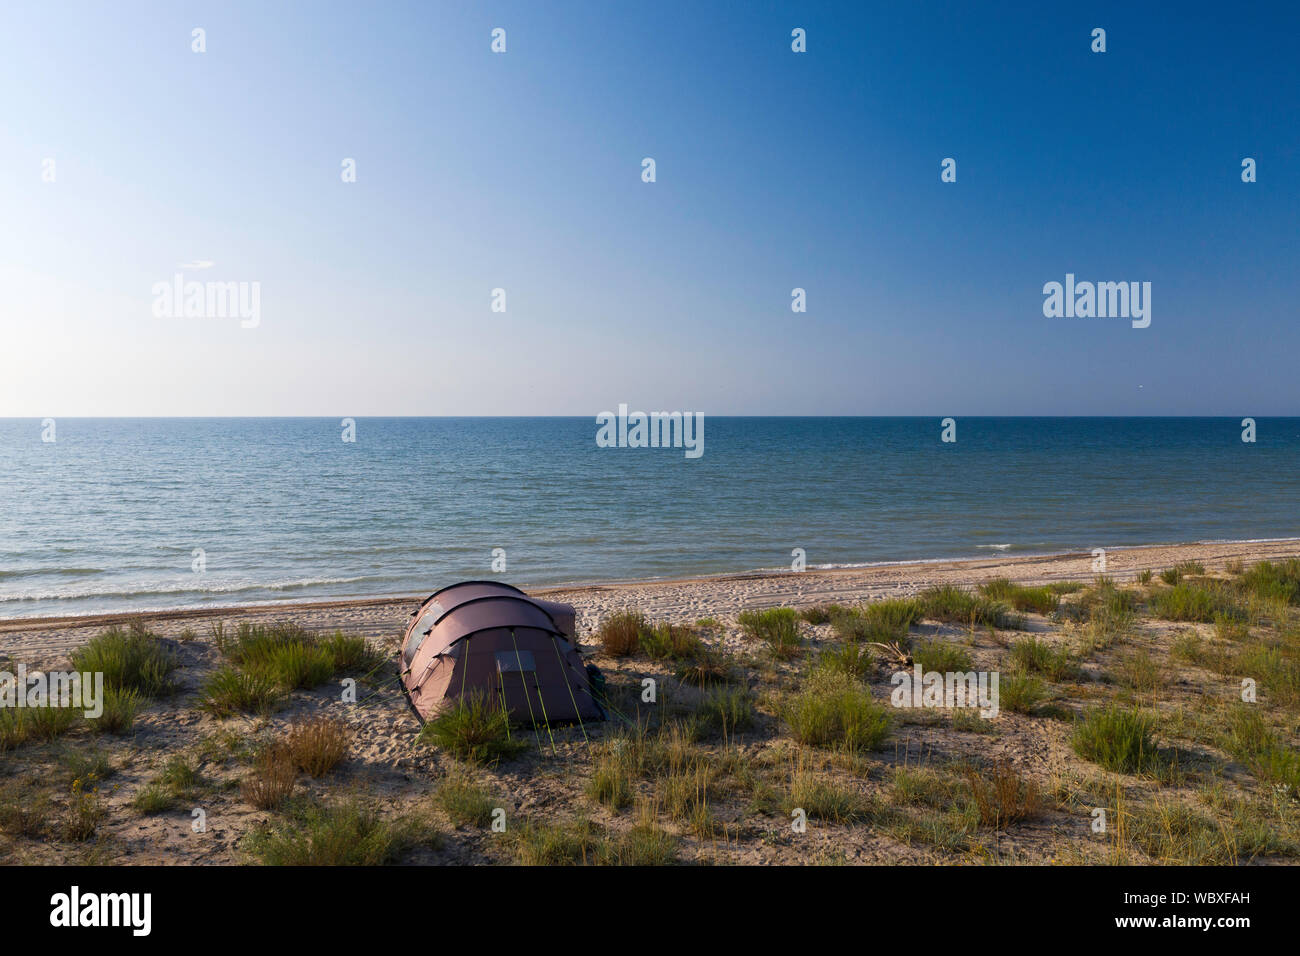 a camping tent on a beach near Black sea at a sunny day Stock Photo